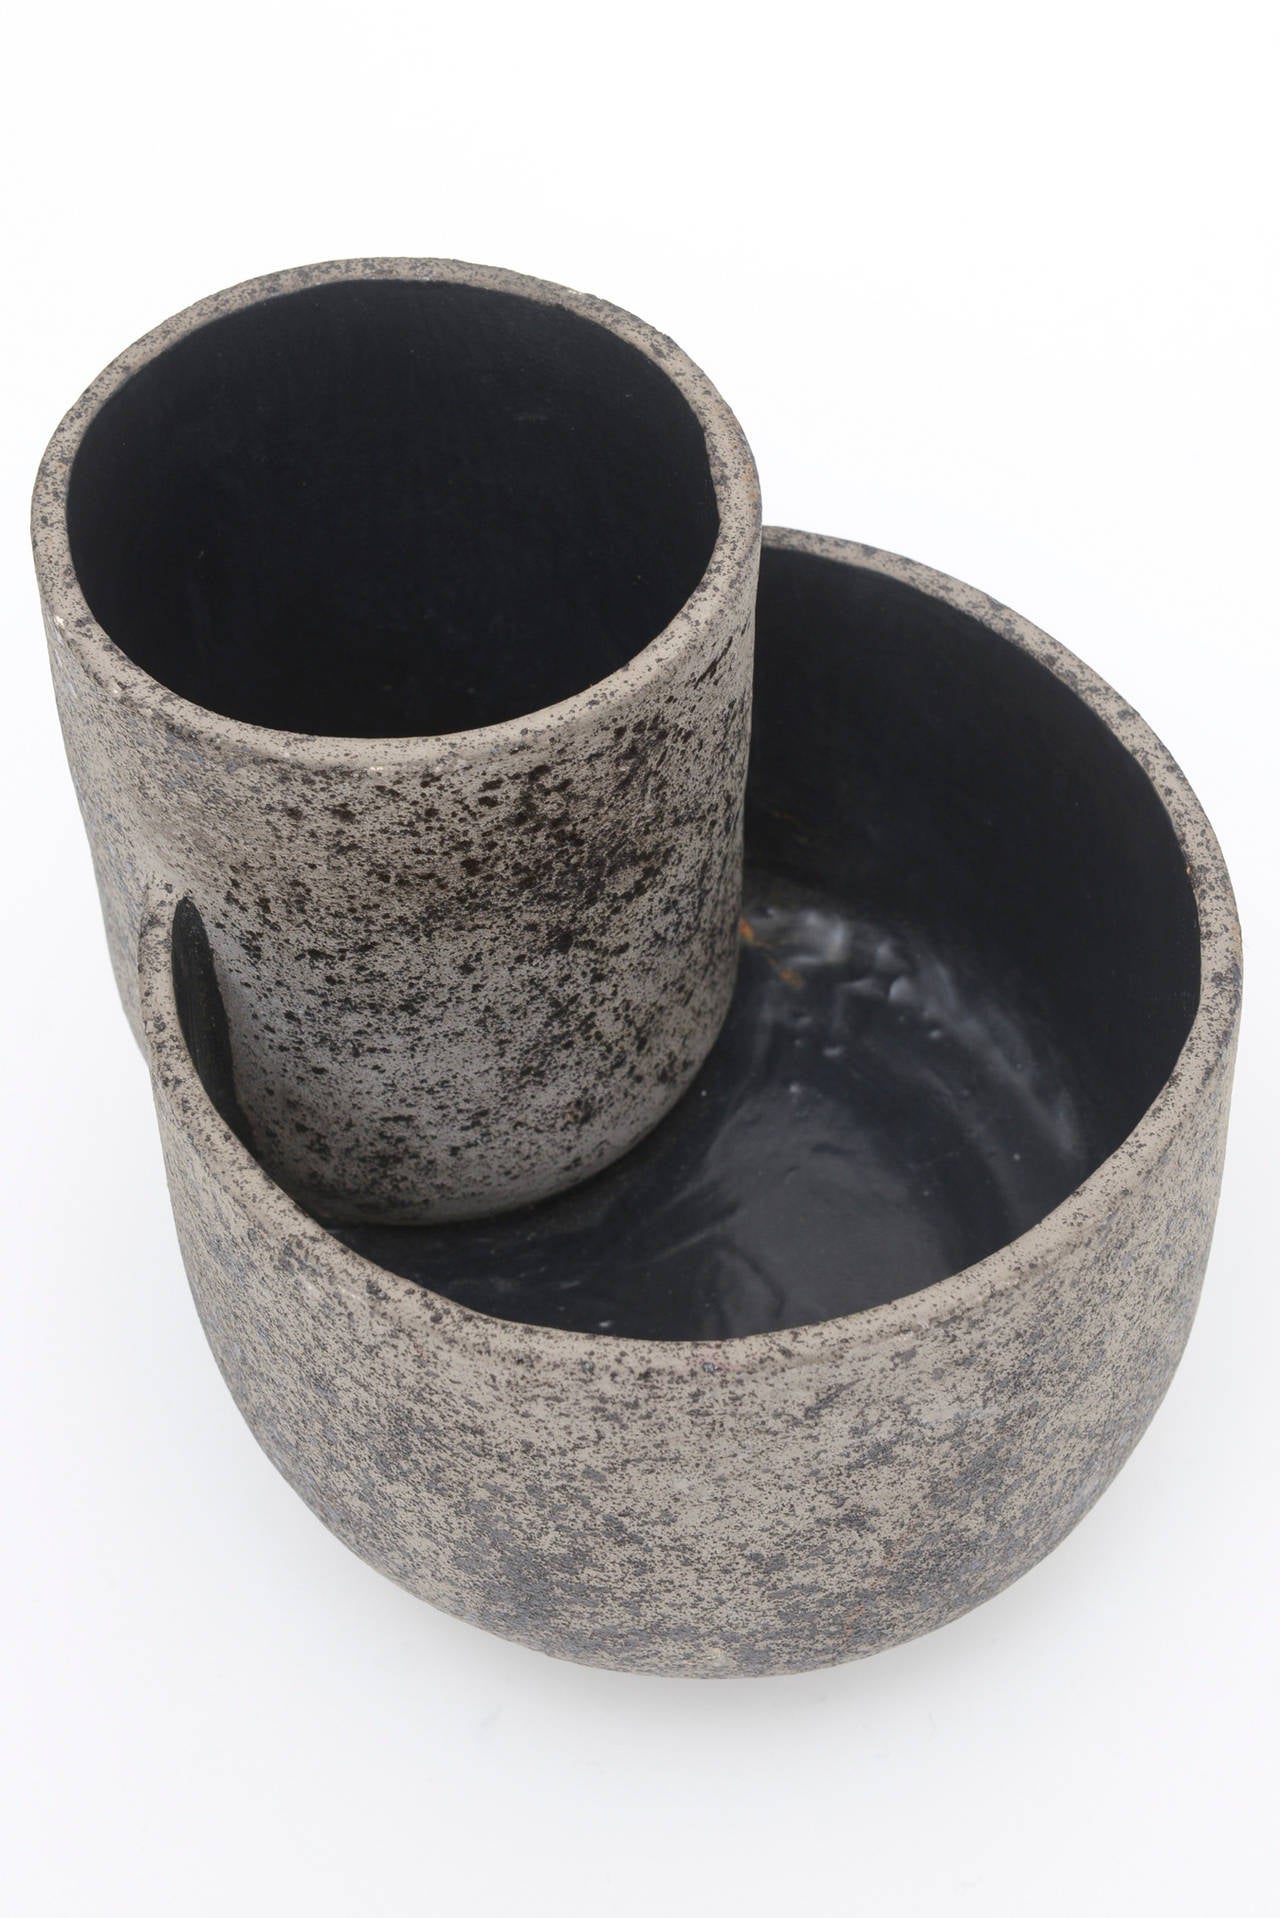 The interesting shapes and forms of this two-part, two-tiered sculptural Japanese Zen vase or vessel has 
the feel and look of ancient civilizations with a modern sculptural presence.
It has a flat texture but looks raised.
The more interesting